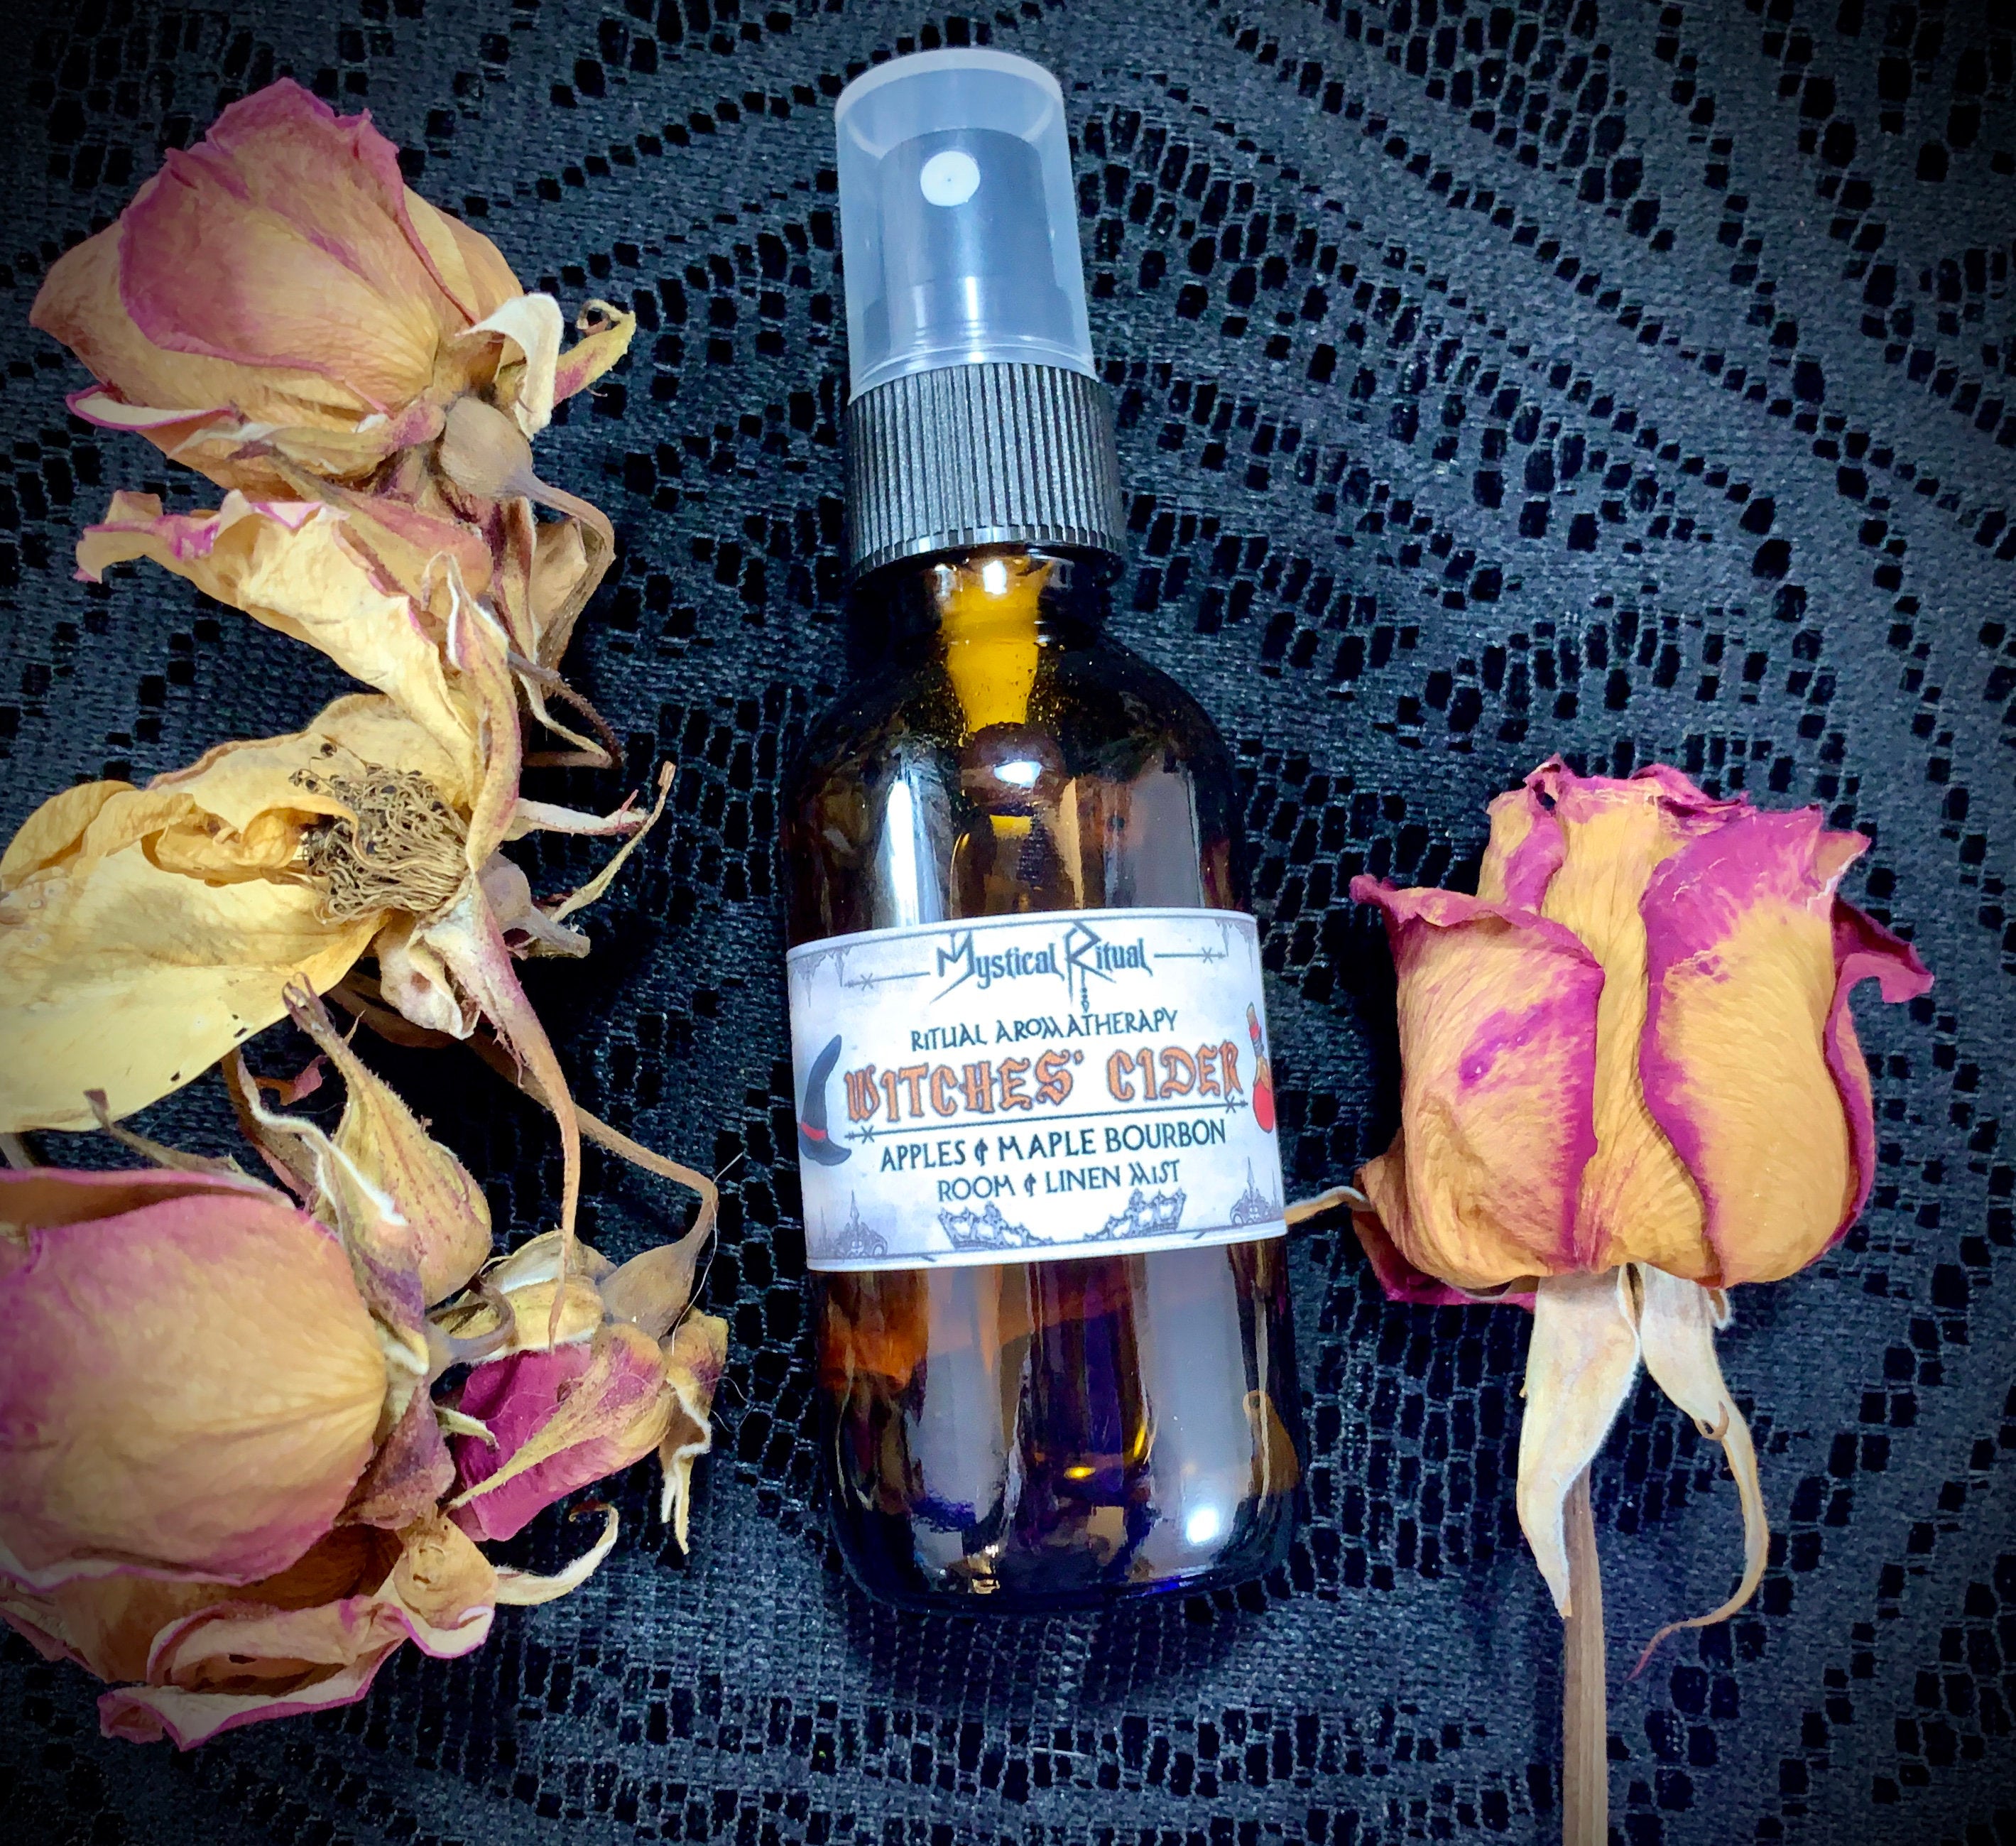 WITCHES' CIDER Aromatherapy Mist